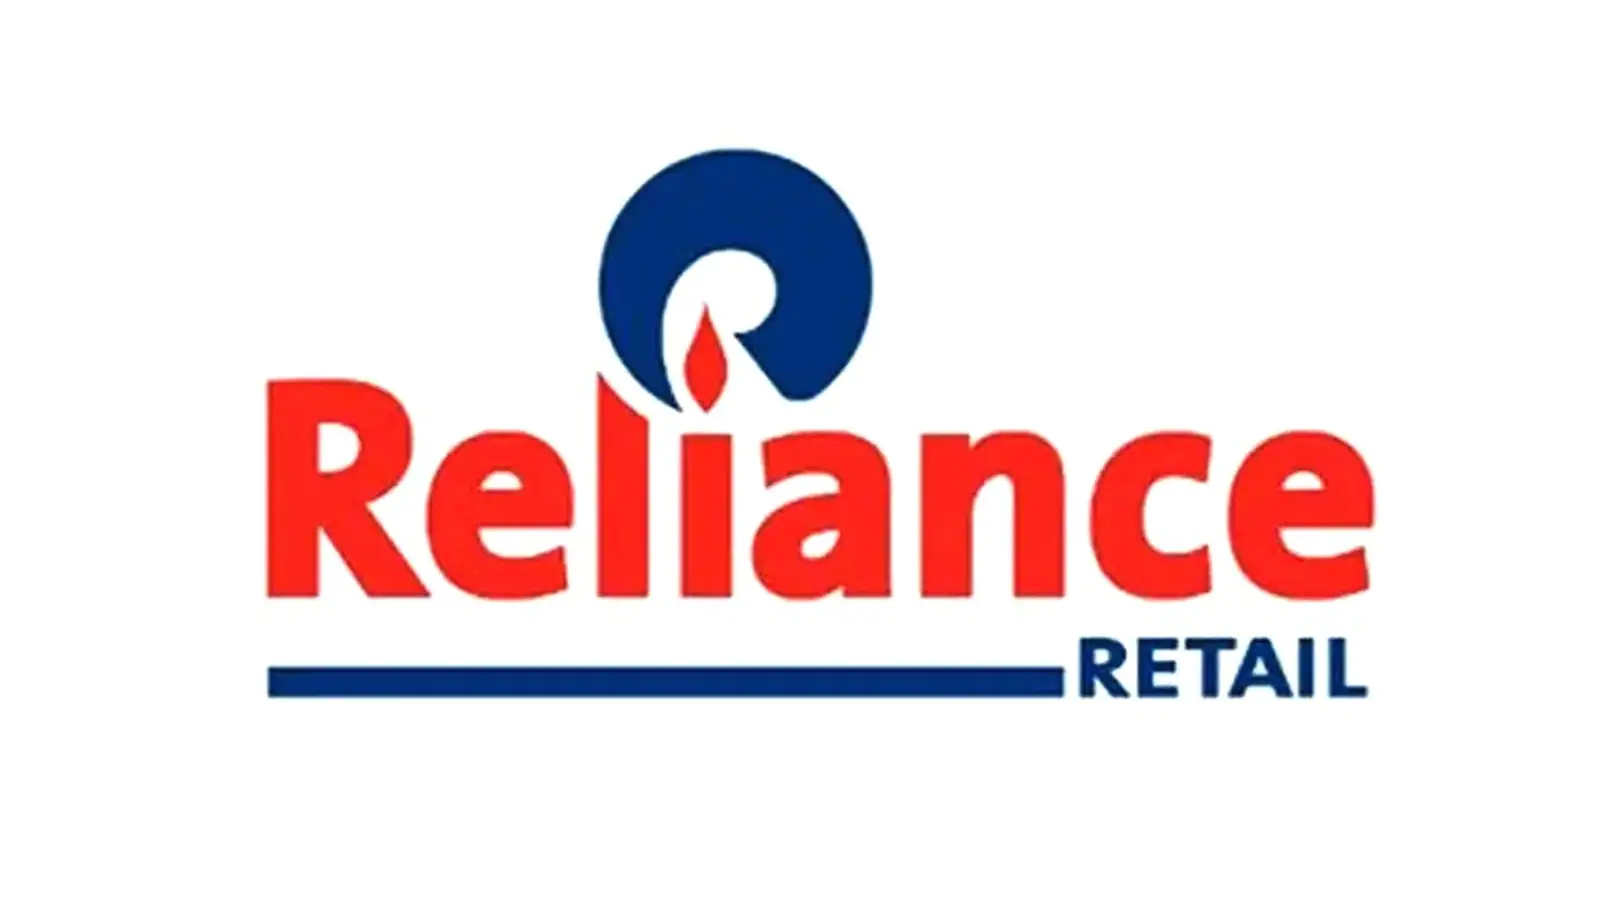 Reliance Retail Unlisted Shares